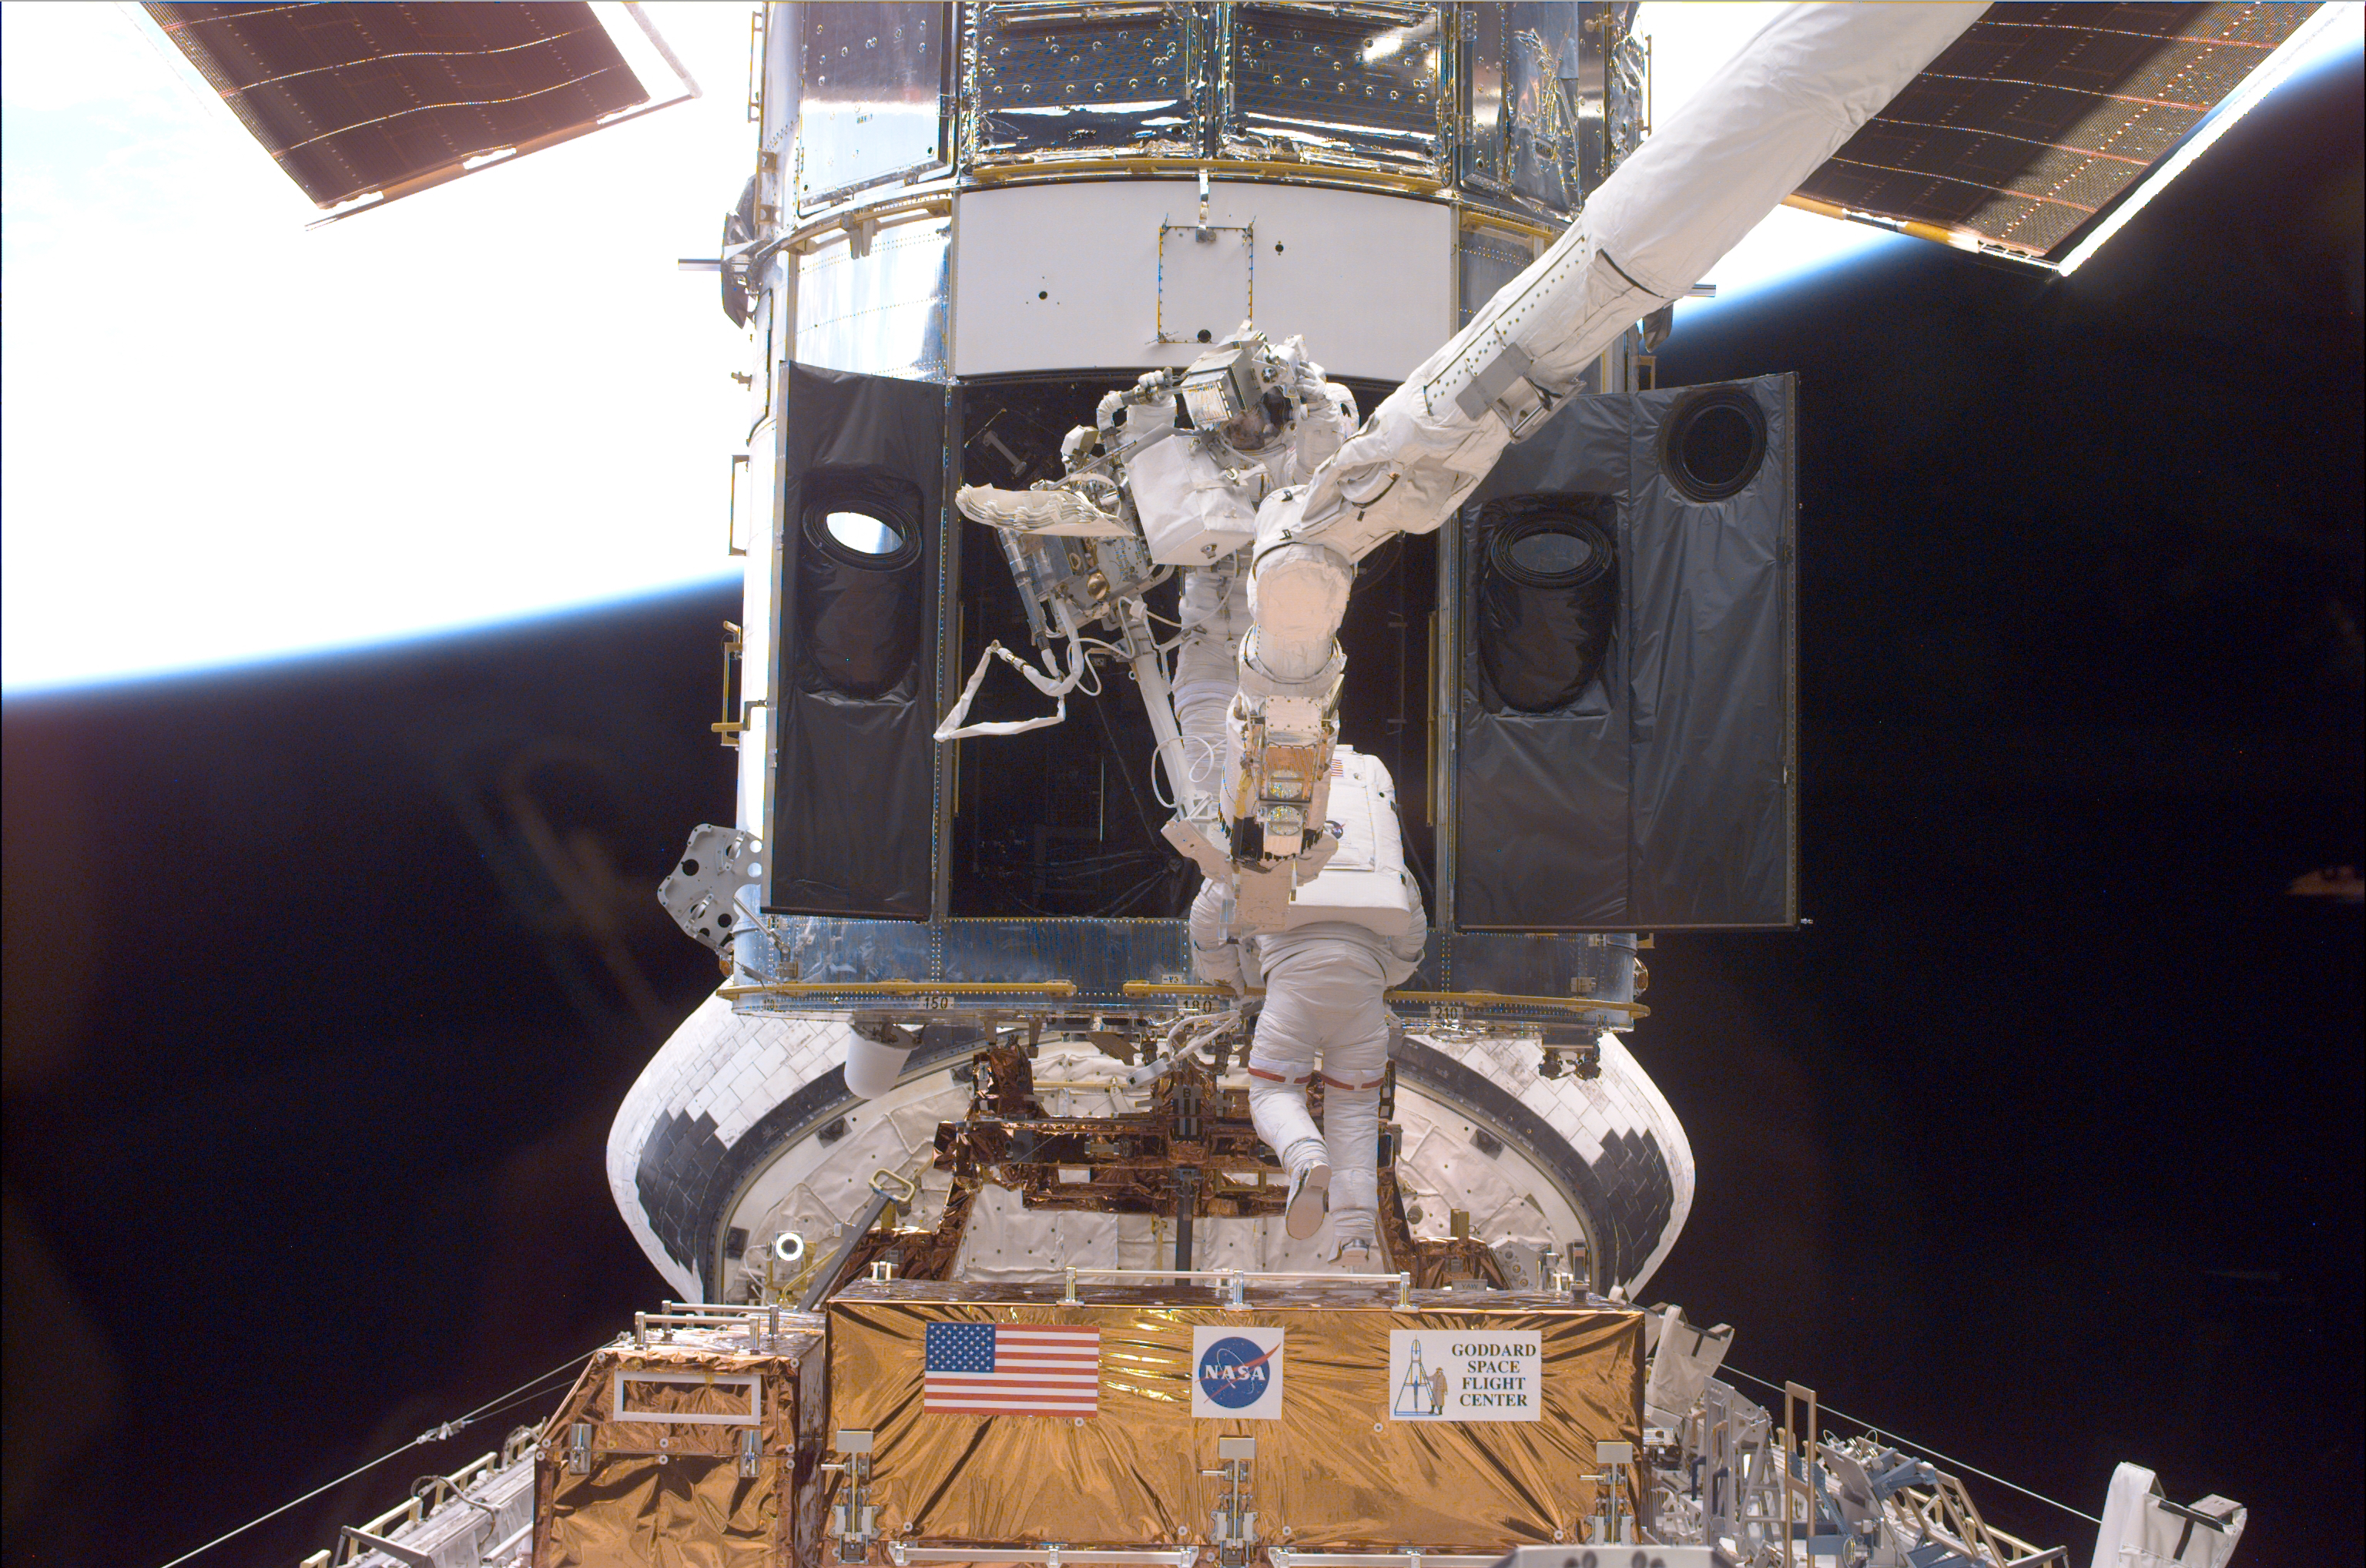 One astronaut is perched on the robotic arm and the other is gripping one of Hubble's handrails as they gaze into the wide open aft shroud doors.